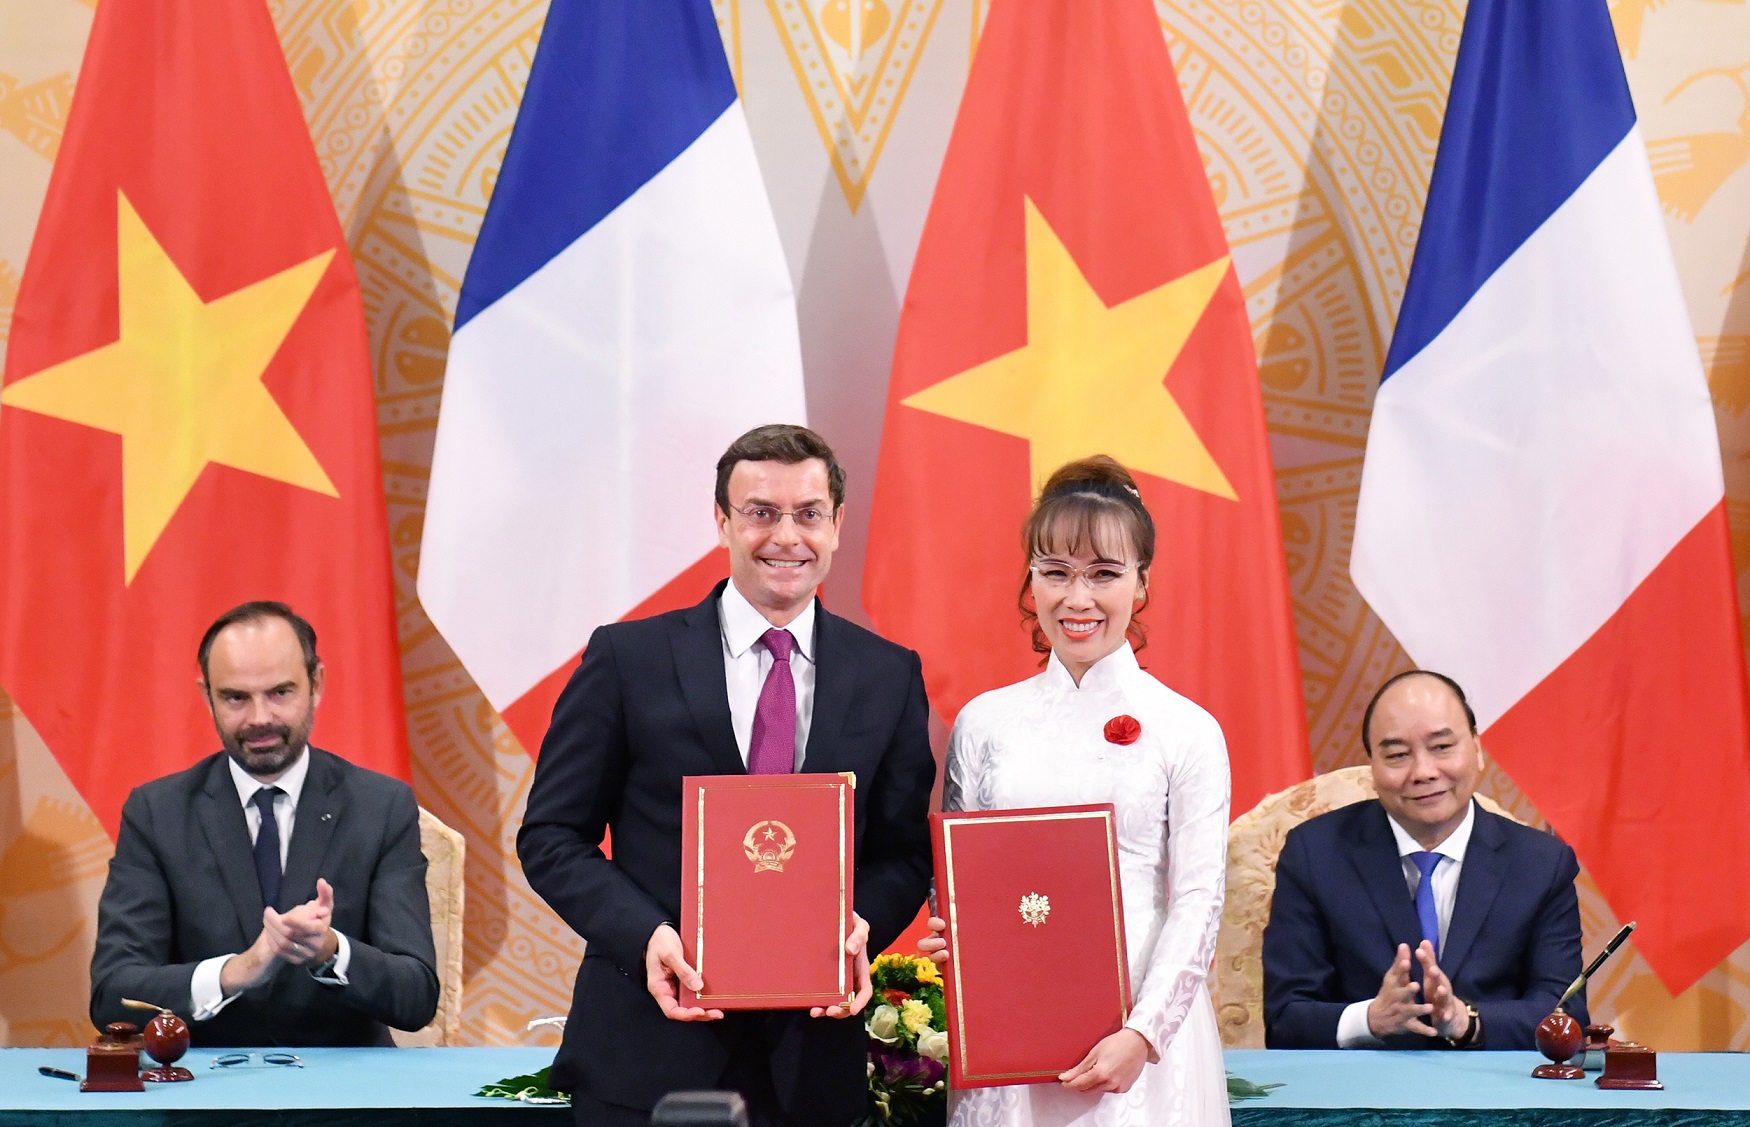 Vietnamese Prime Minister Nguyen Xuan Phuc (R) and French Prime Minister Edouard Philippe (L) witness the signing of a deal between Airbus and Vietjet in Hanoi on November 2, 2018. Photo: Vietjet